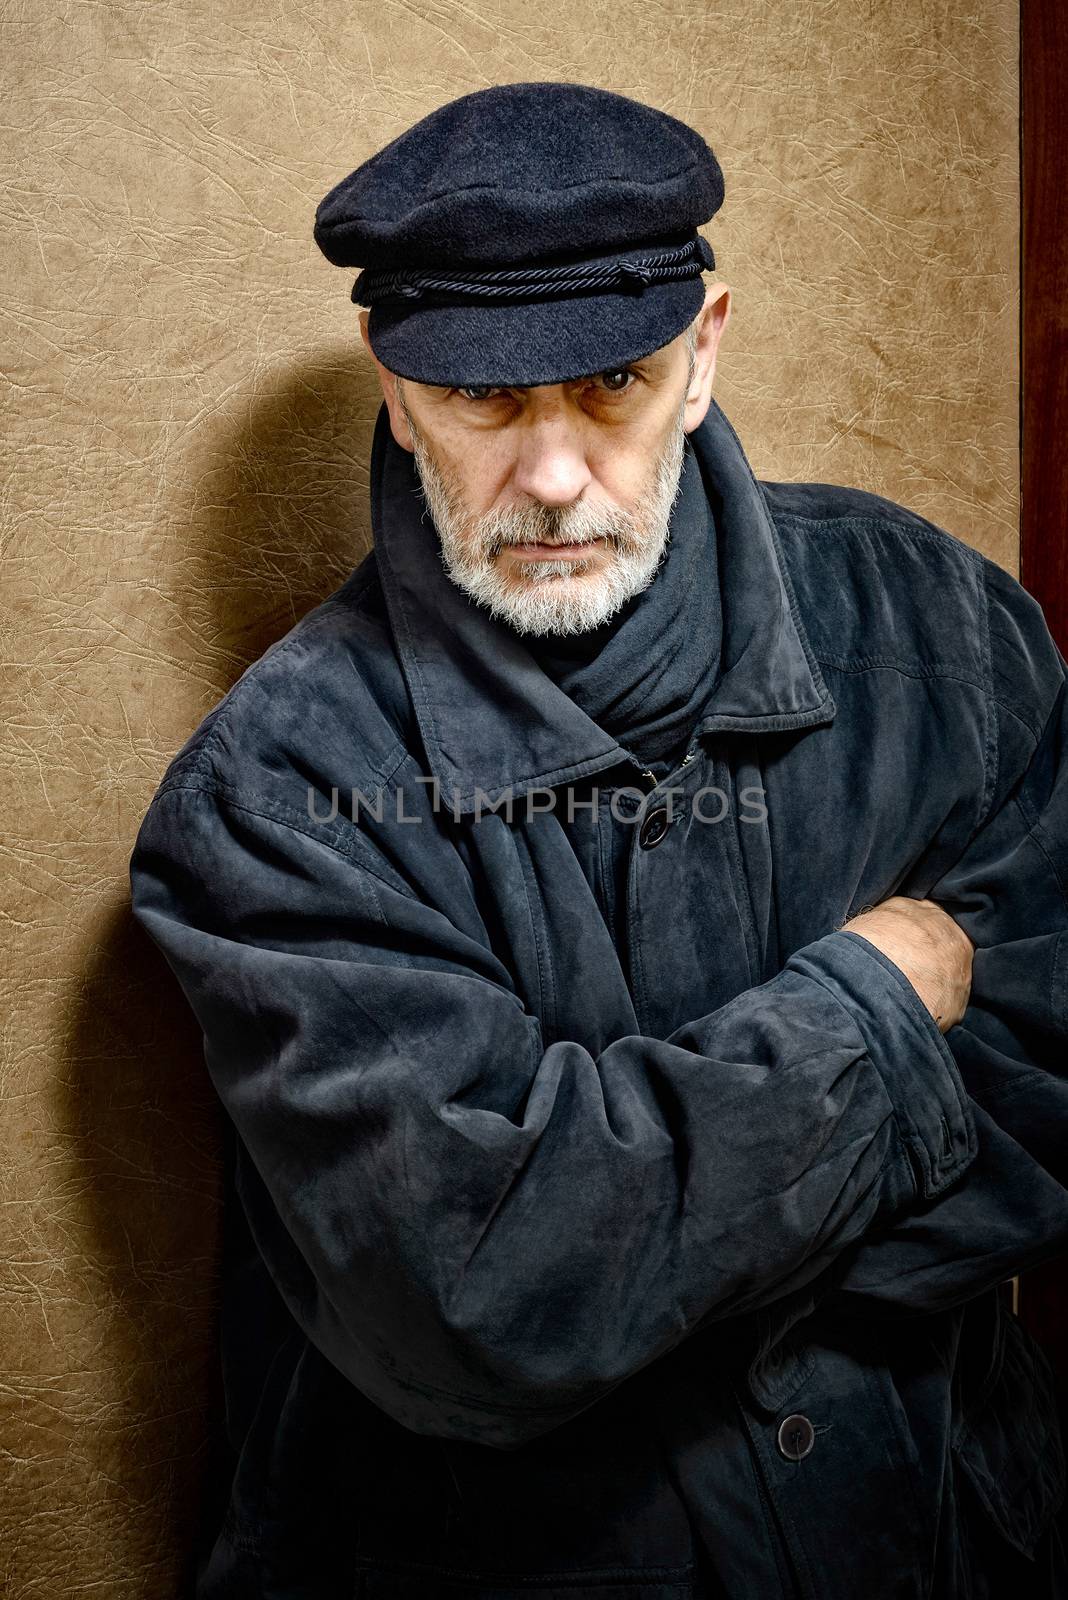 Portrait of a mature man with a white beard and a cap on the head. He could be a sailor, a worker, a docker, or even a gangster or a thug. He has a penetrating gaze.